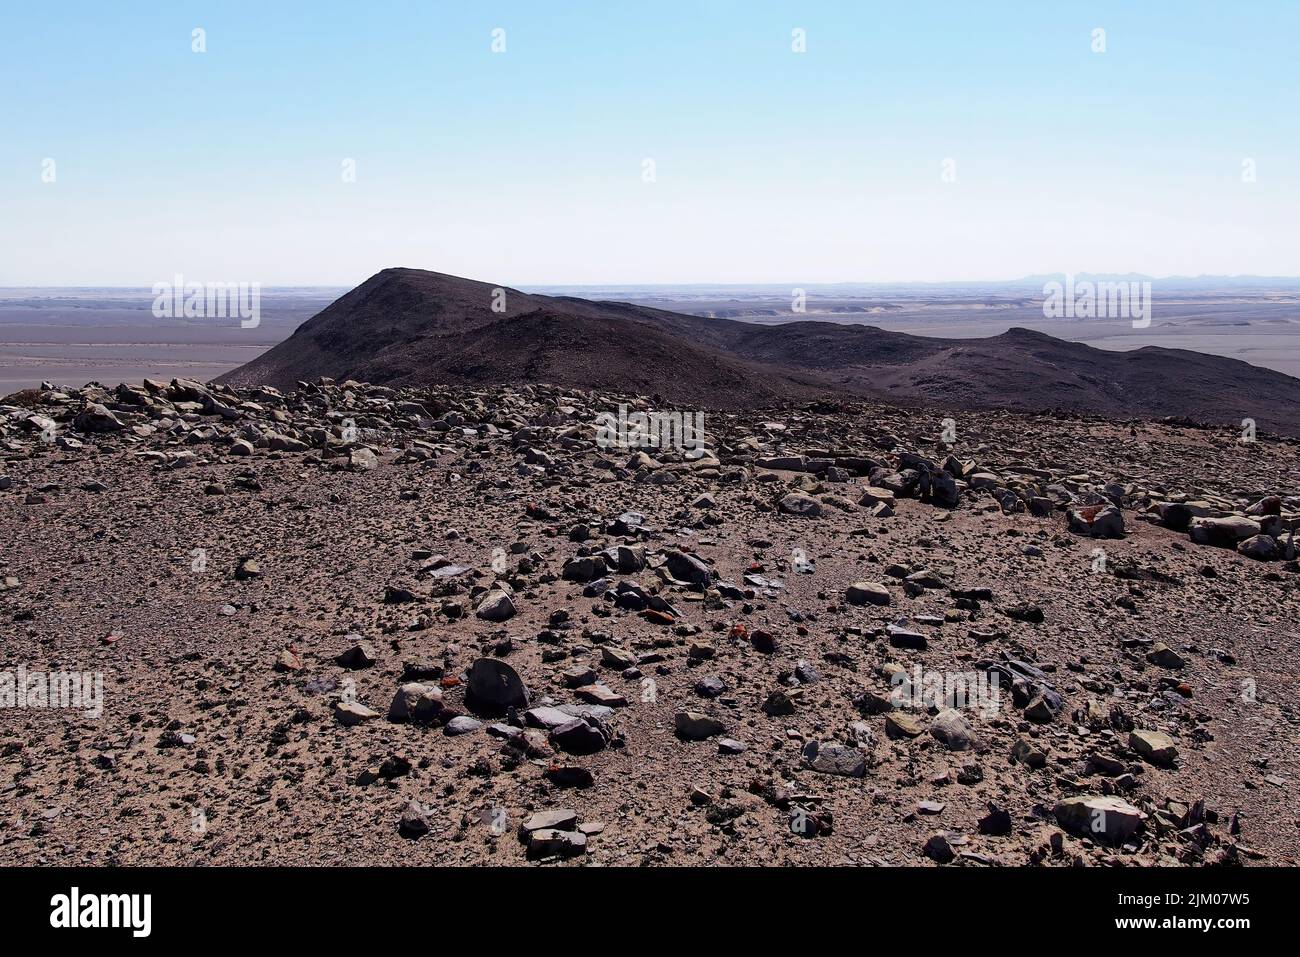 A view of a Messum Crater at the Damaraland territory of Namibia, Africa Stock Photo